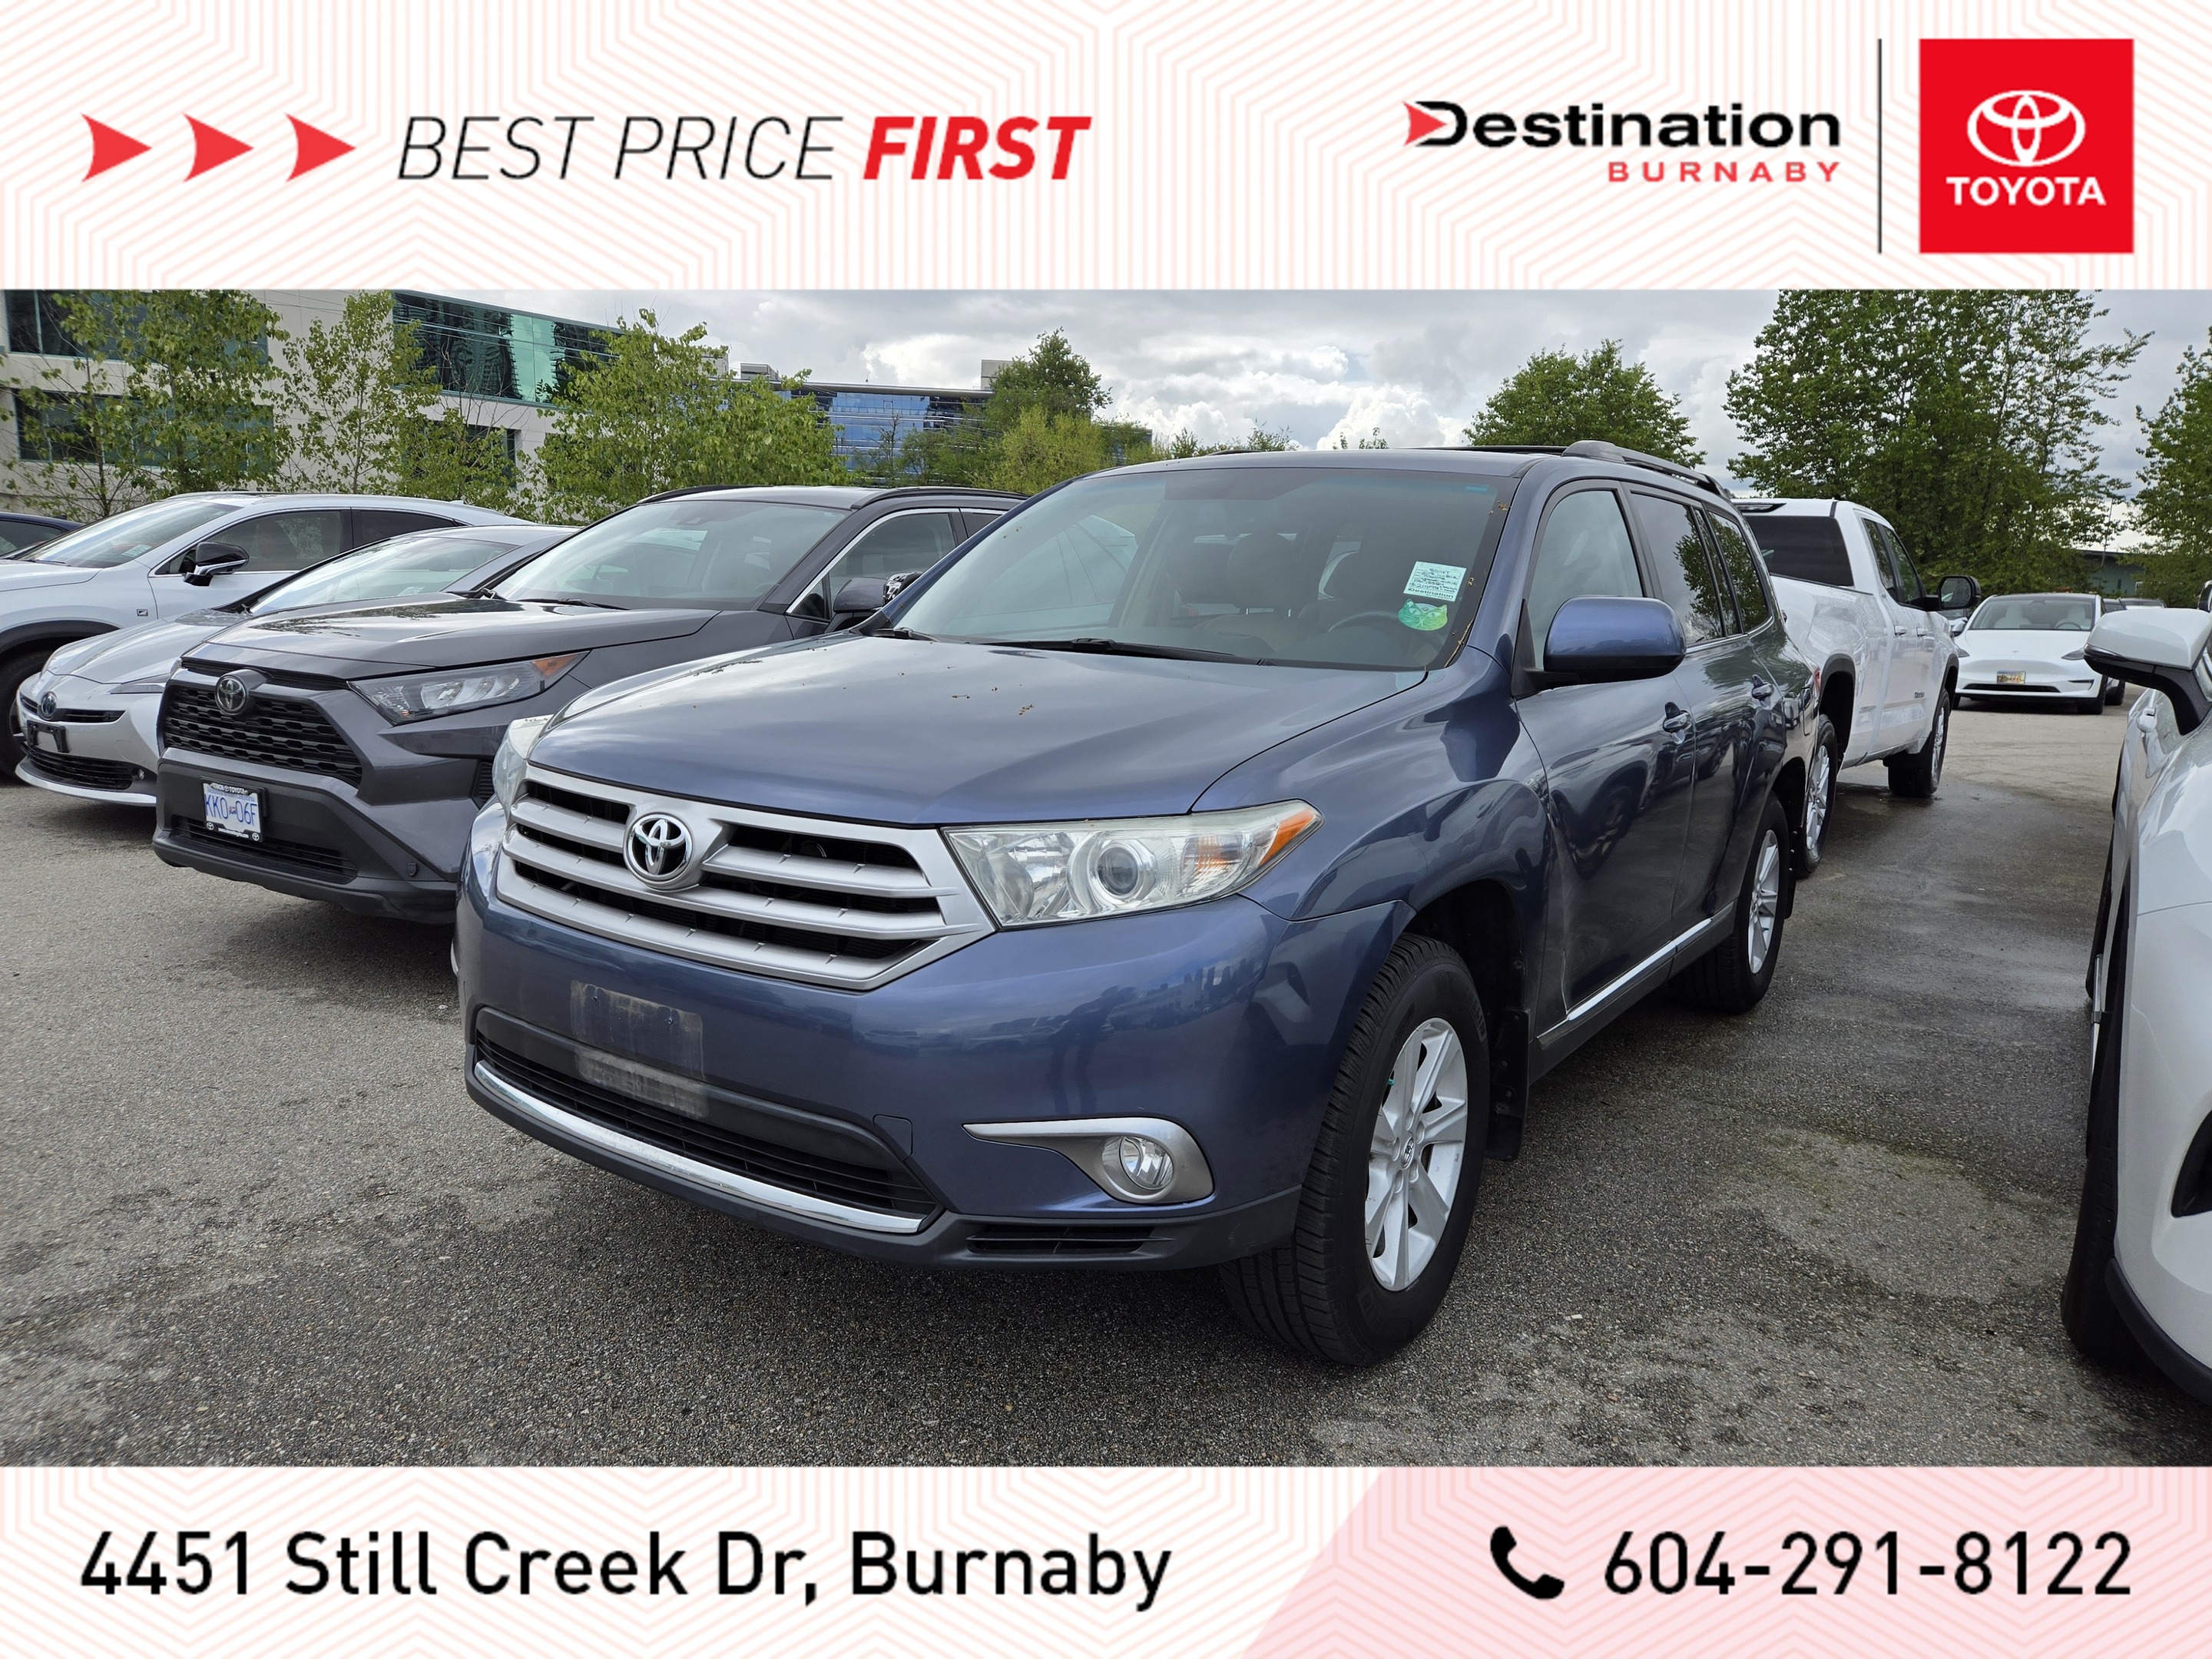 2013 Toyota Highlander 4WD V6 w/ Leather Package - Local, One Owner!